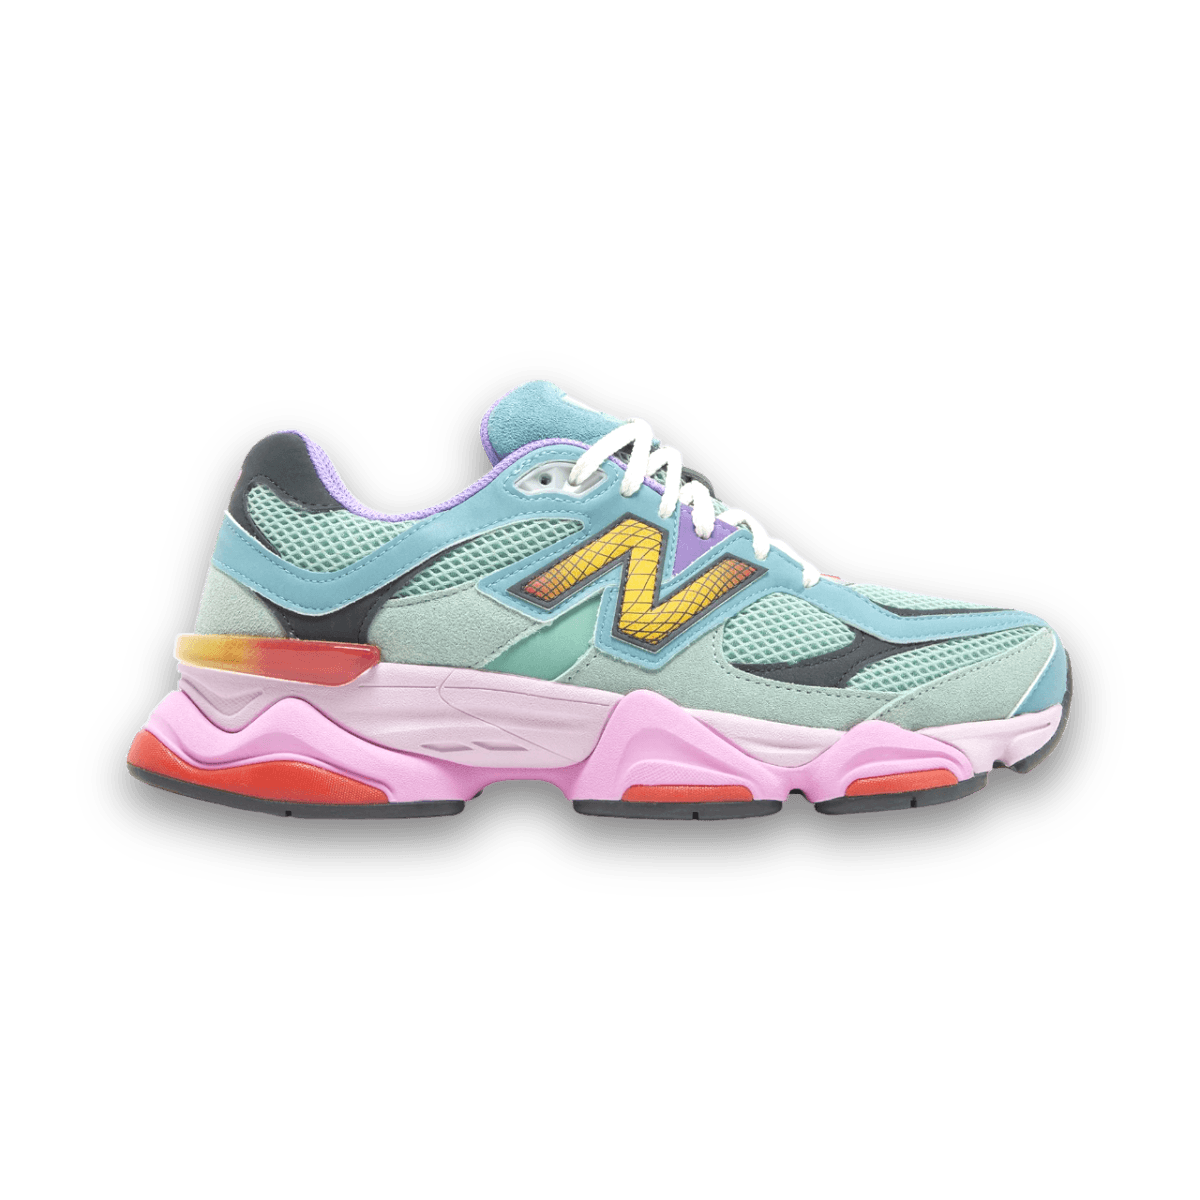 Jawns on Fire New Balance Low Sneaker New Balance 9060 'Warped' Teal & Pink